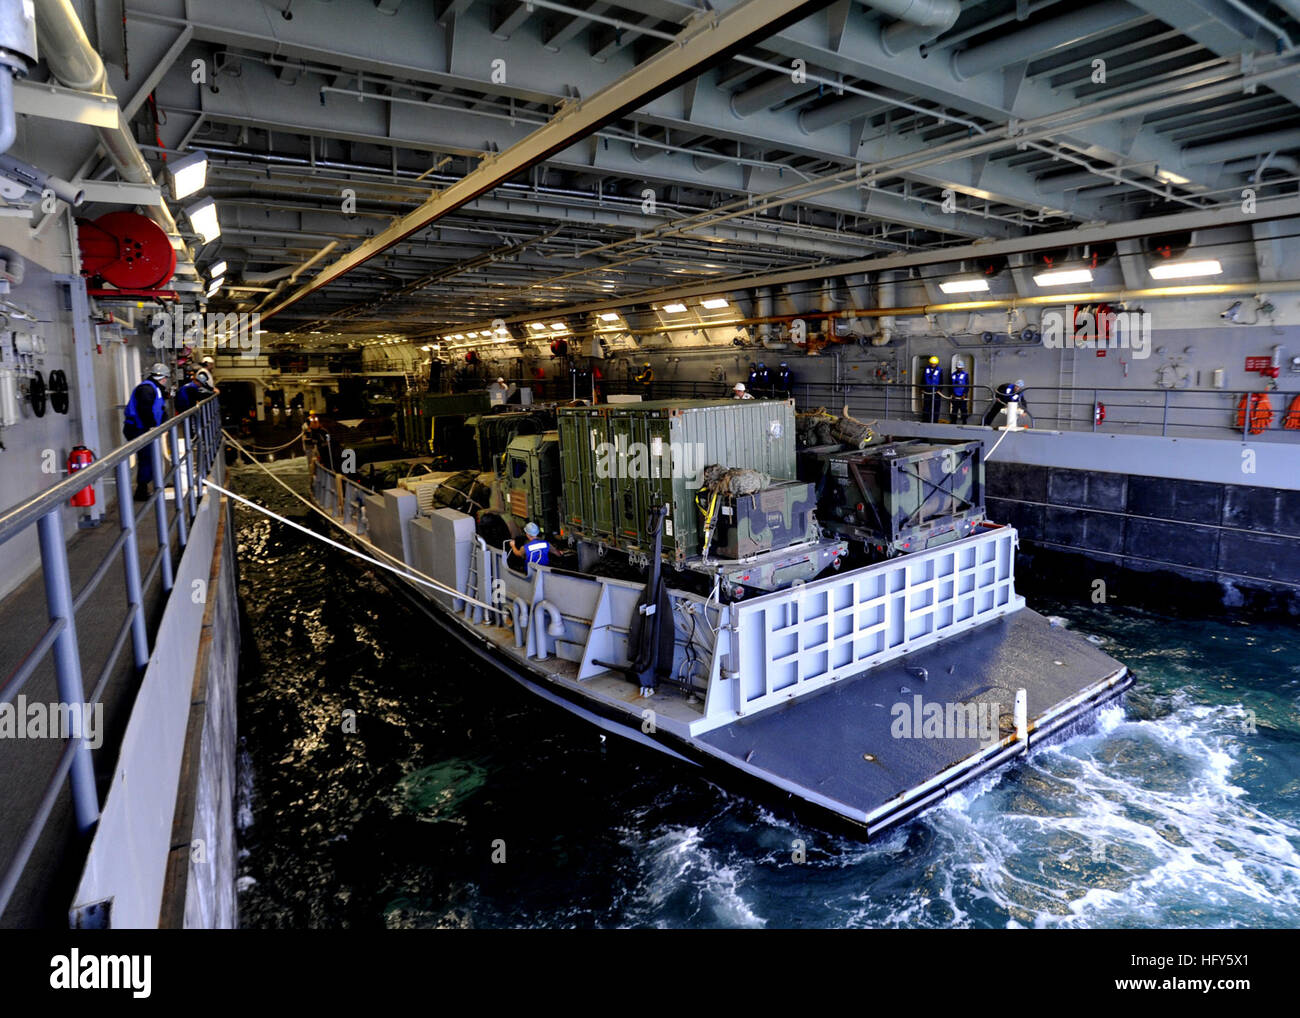 100428-N-2147L-002 ONSLOW BAY, N.C. (April 28, 2010)) Landing Craft Utility (LCU) 1661, assigned to Assault Craft Unit (ACU 2), prepares to depart the well deck of the amphibious transport dock ship USS New York (LPD 21). New York is underway conducting training in the Atlantic Ocean. (U.S. Navy photo by Mass Communication Specialist 1st Class Corey Lewis/Released) US Navy 100428-N-2147L-002 Landing Craft Utility (LCU) 1661 prepares to depart the well deck of USS New York (LPD 21) Stock Photo